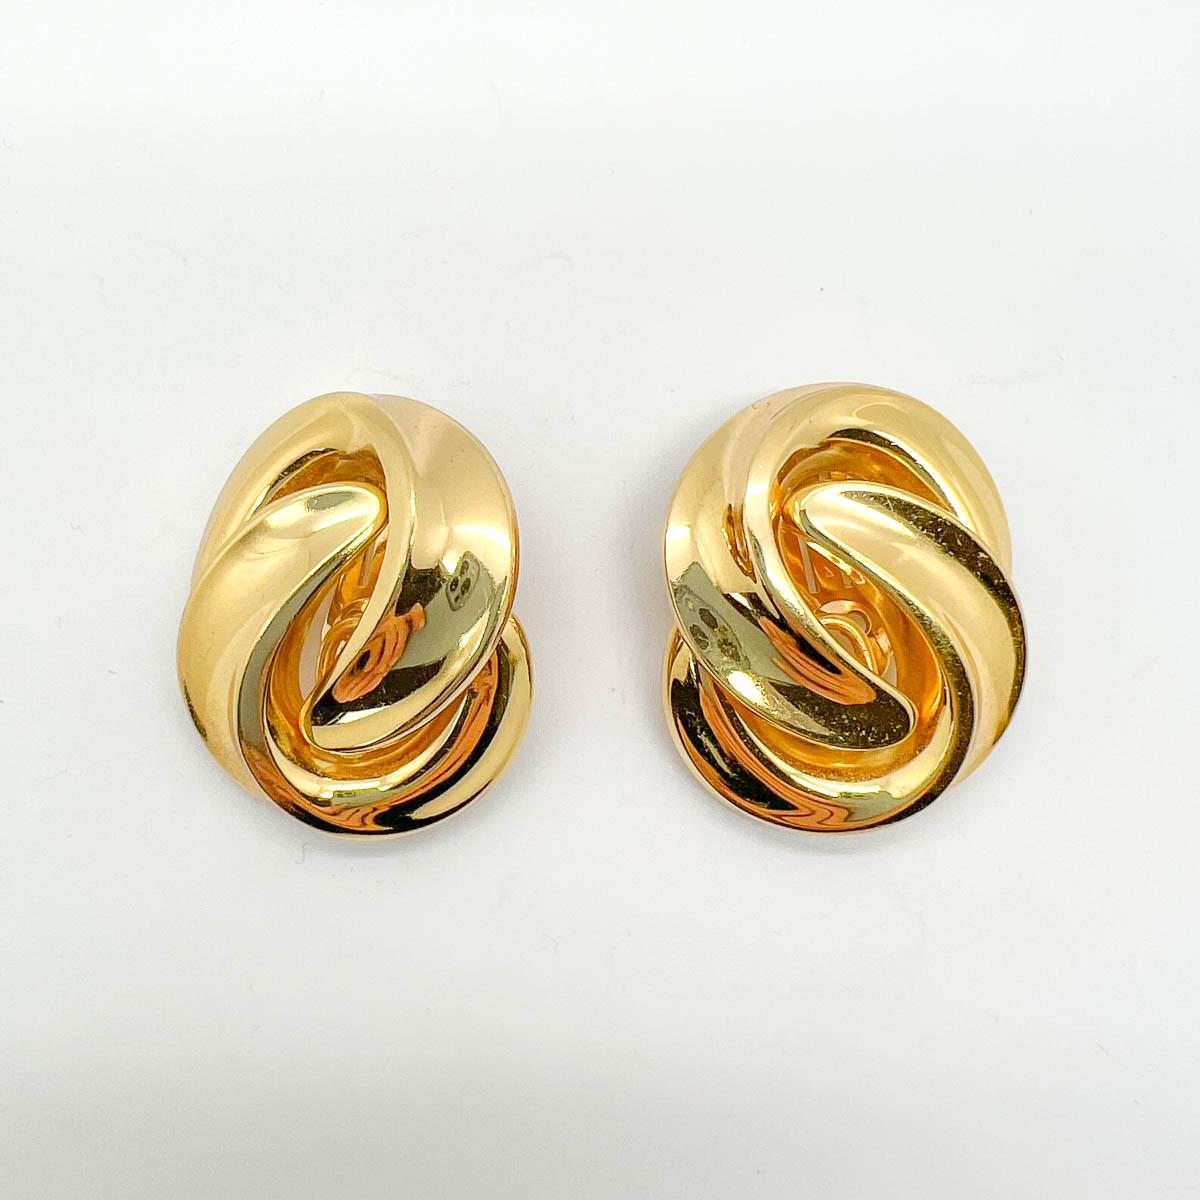 A pair of vintage Dior Grande Love knot Earrings. A simply stunning take on the smaller love knot earrings from this era. Large enough to make a grand statement, the lustrous high shine gold plate will perfect your look every time. The perfect